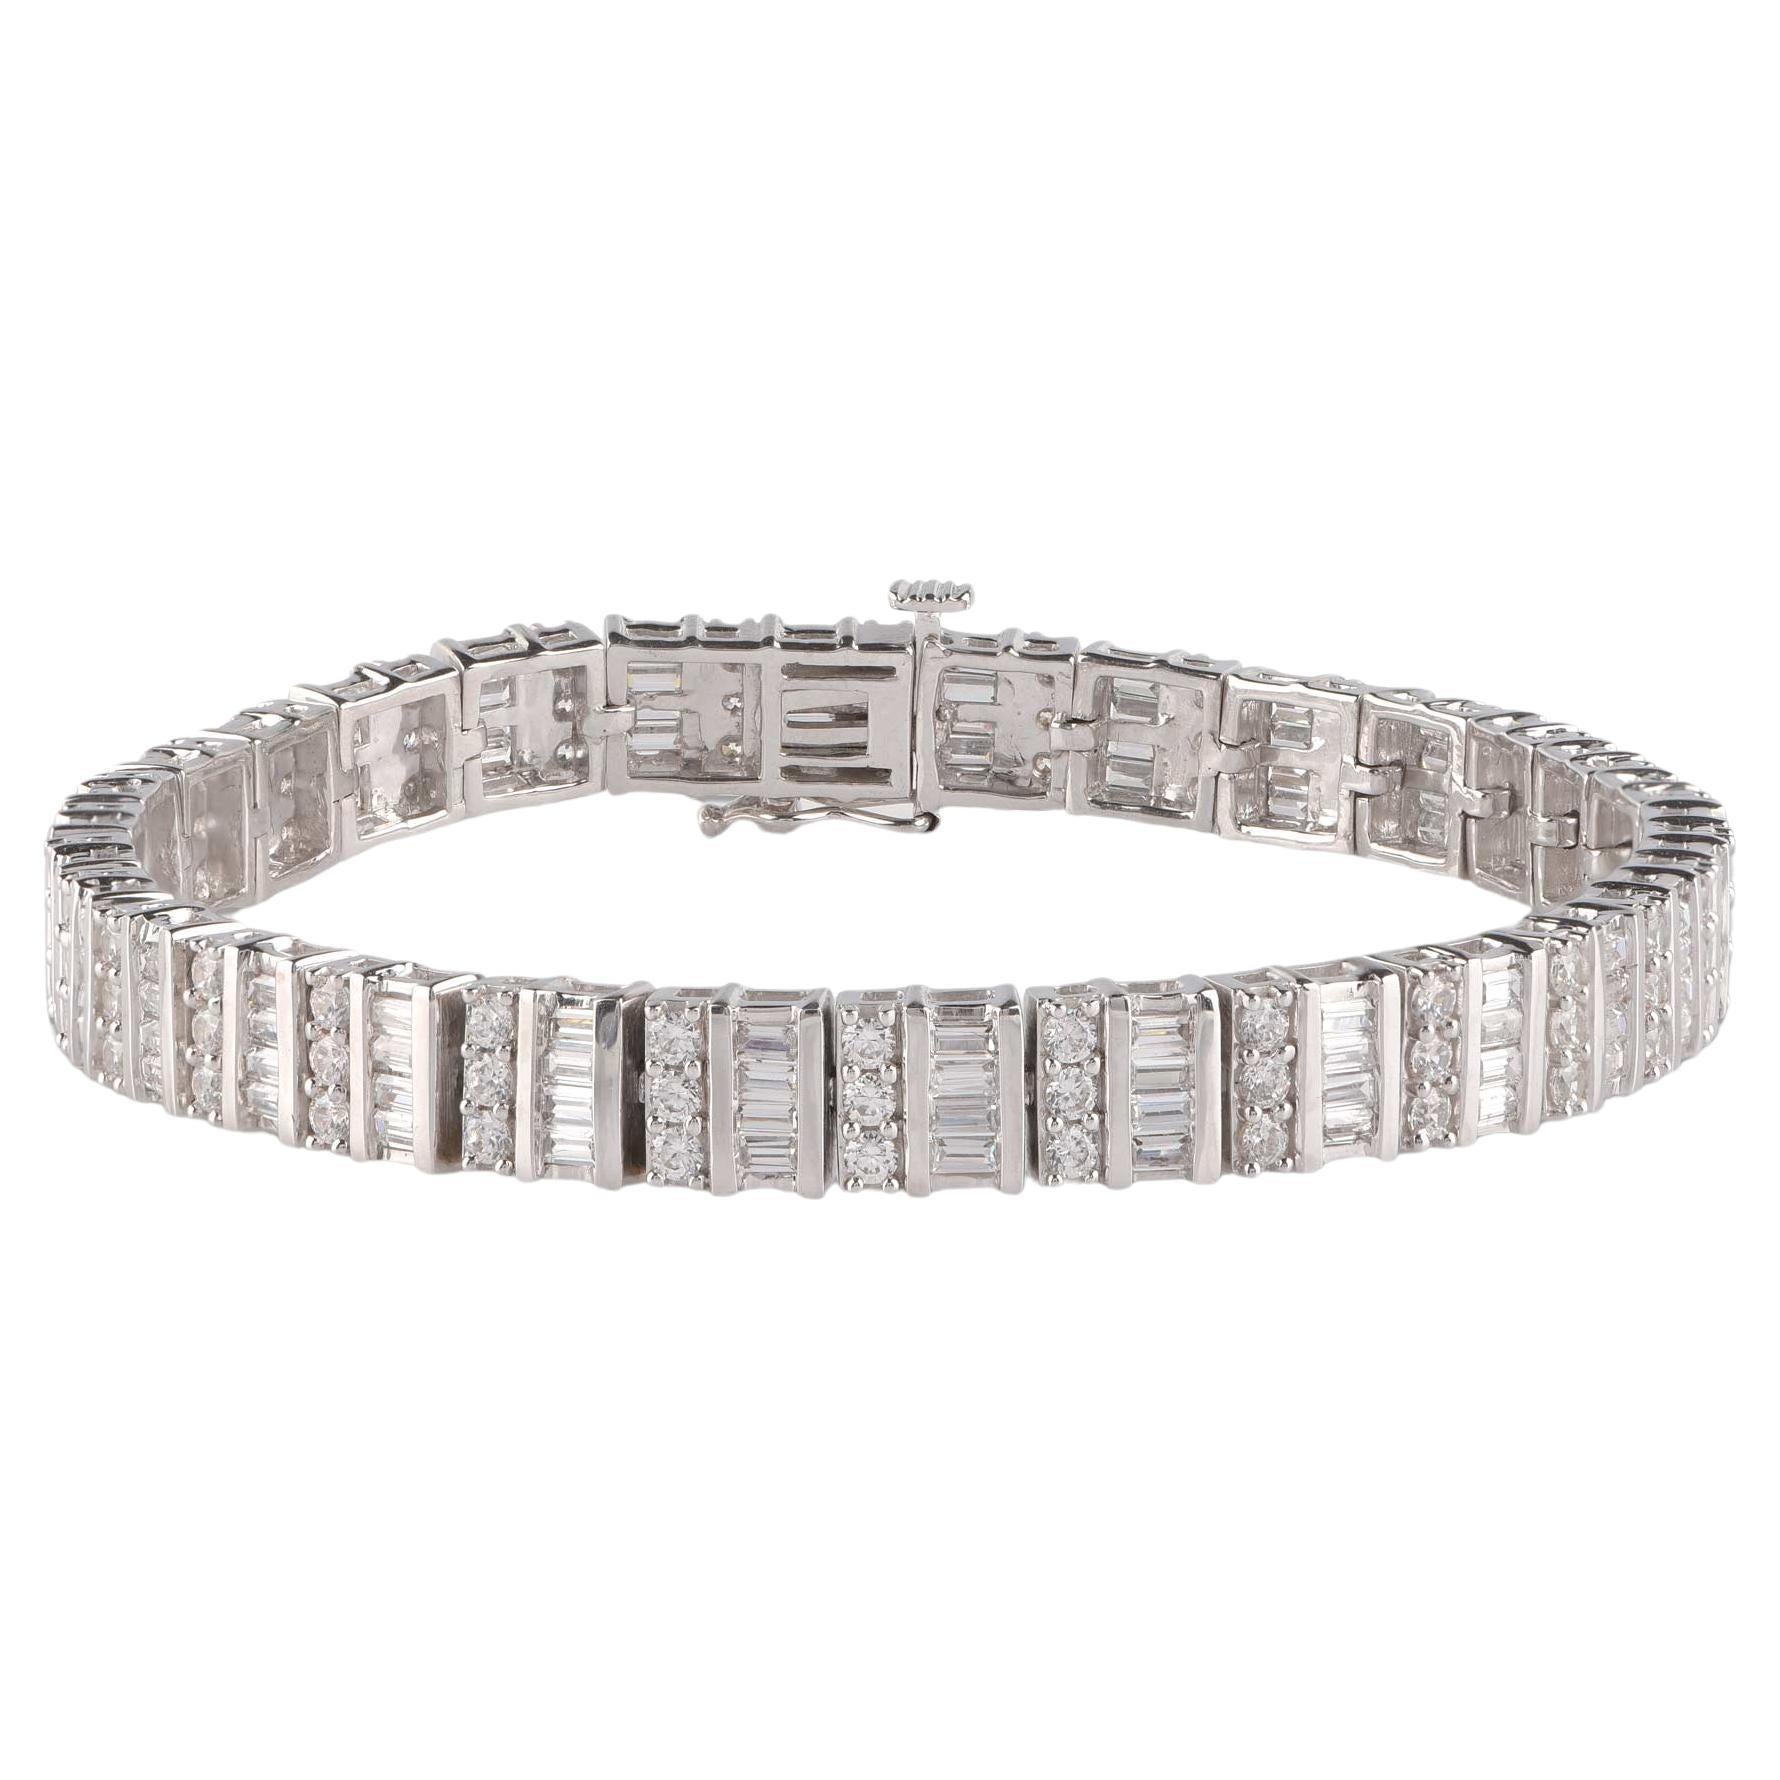 TJD 5.0 CTW Baguette and Round Cut Diamond 14KT White Gold Link Bracelet For Sale